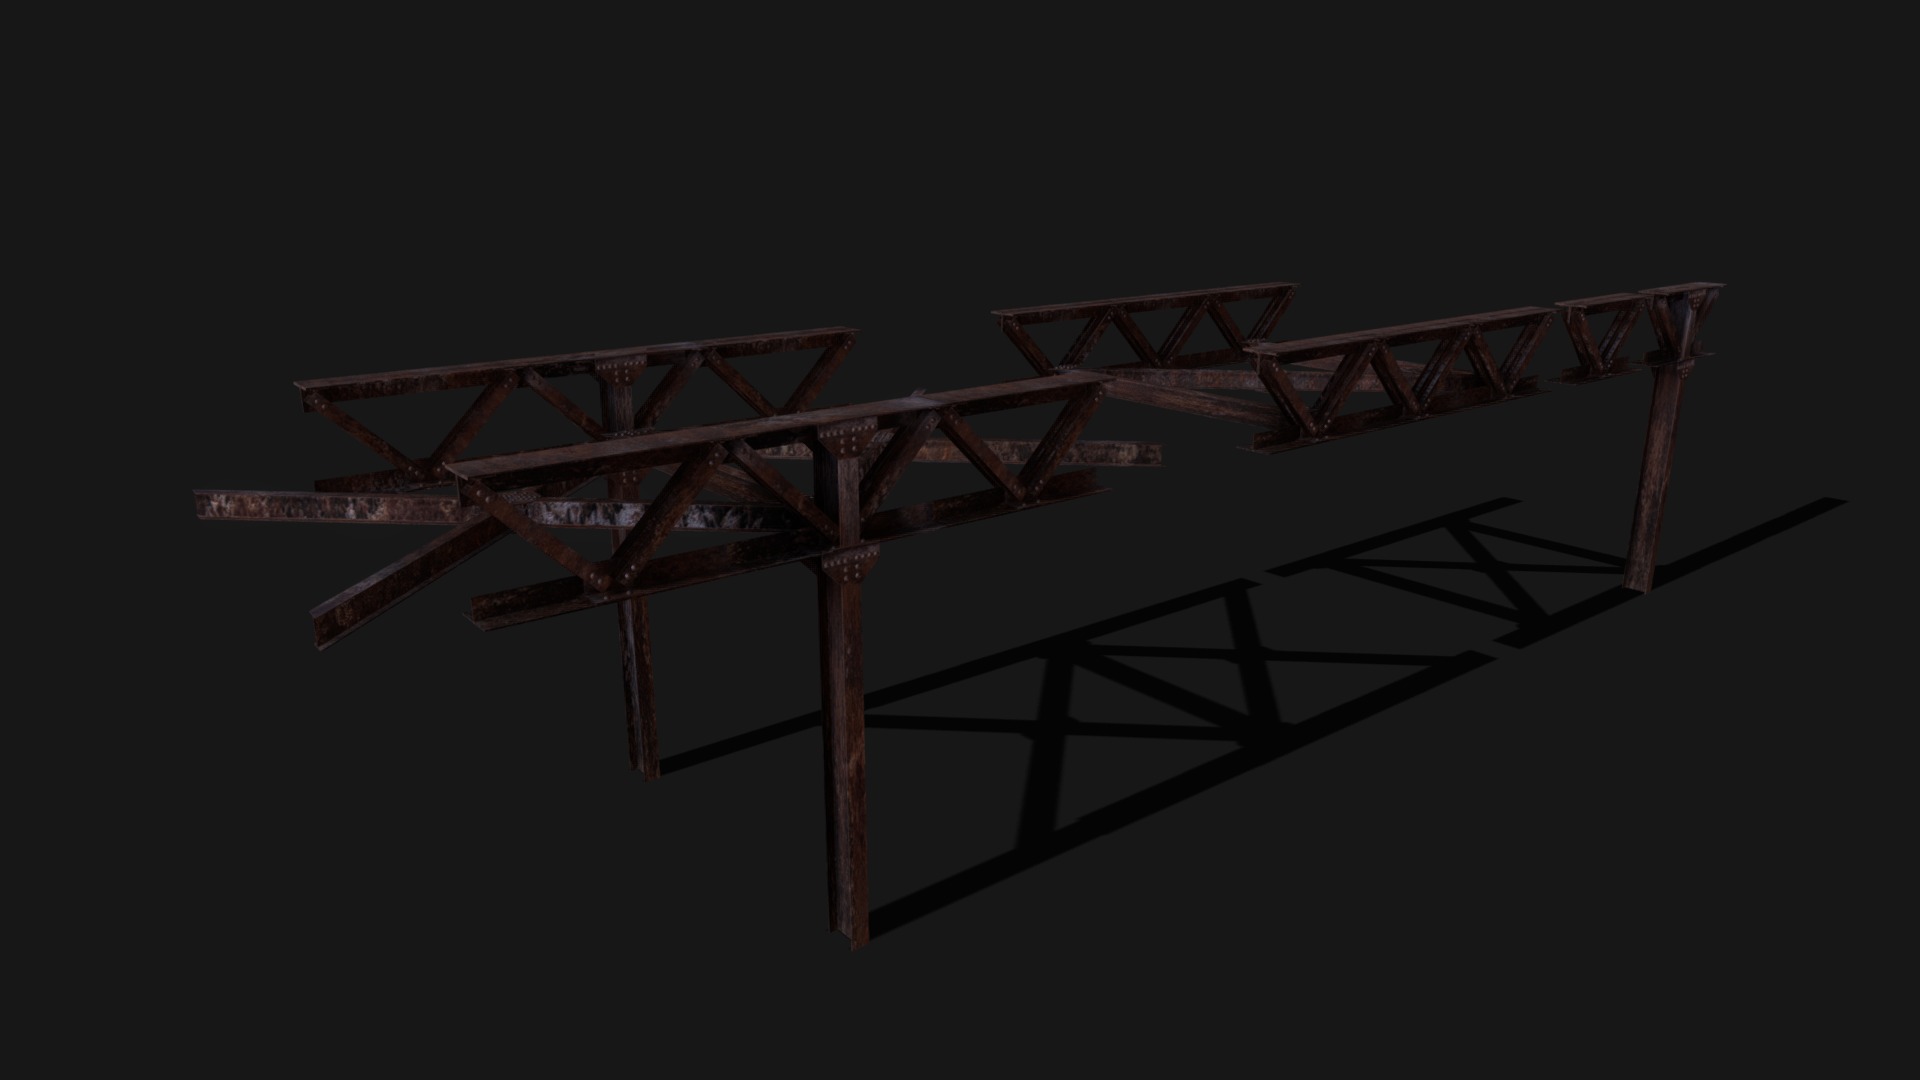 3D model Iron Structure Kit asset - This is a 3D model of the Iron Structure Kit asset. The 3D model is about a wooden frame with a metal frame.